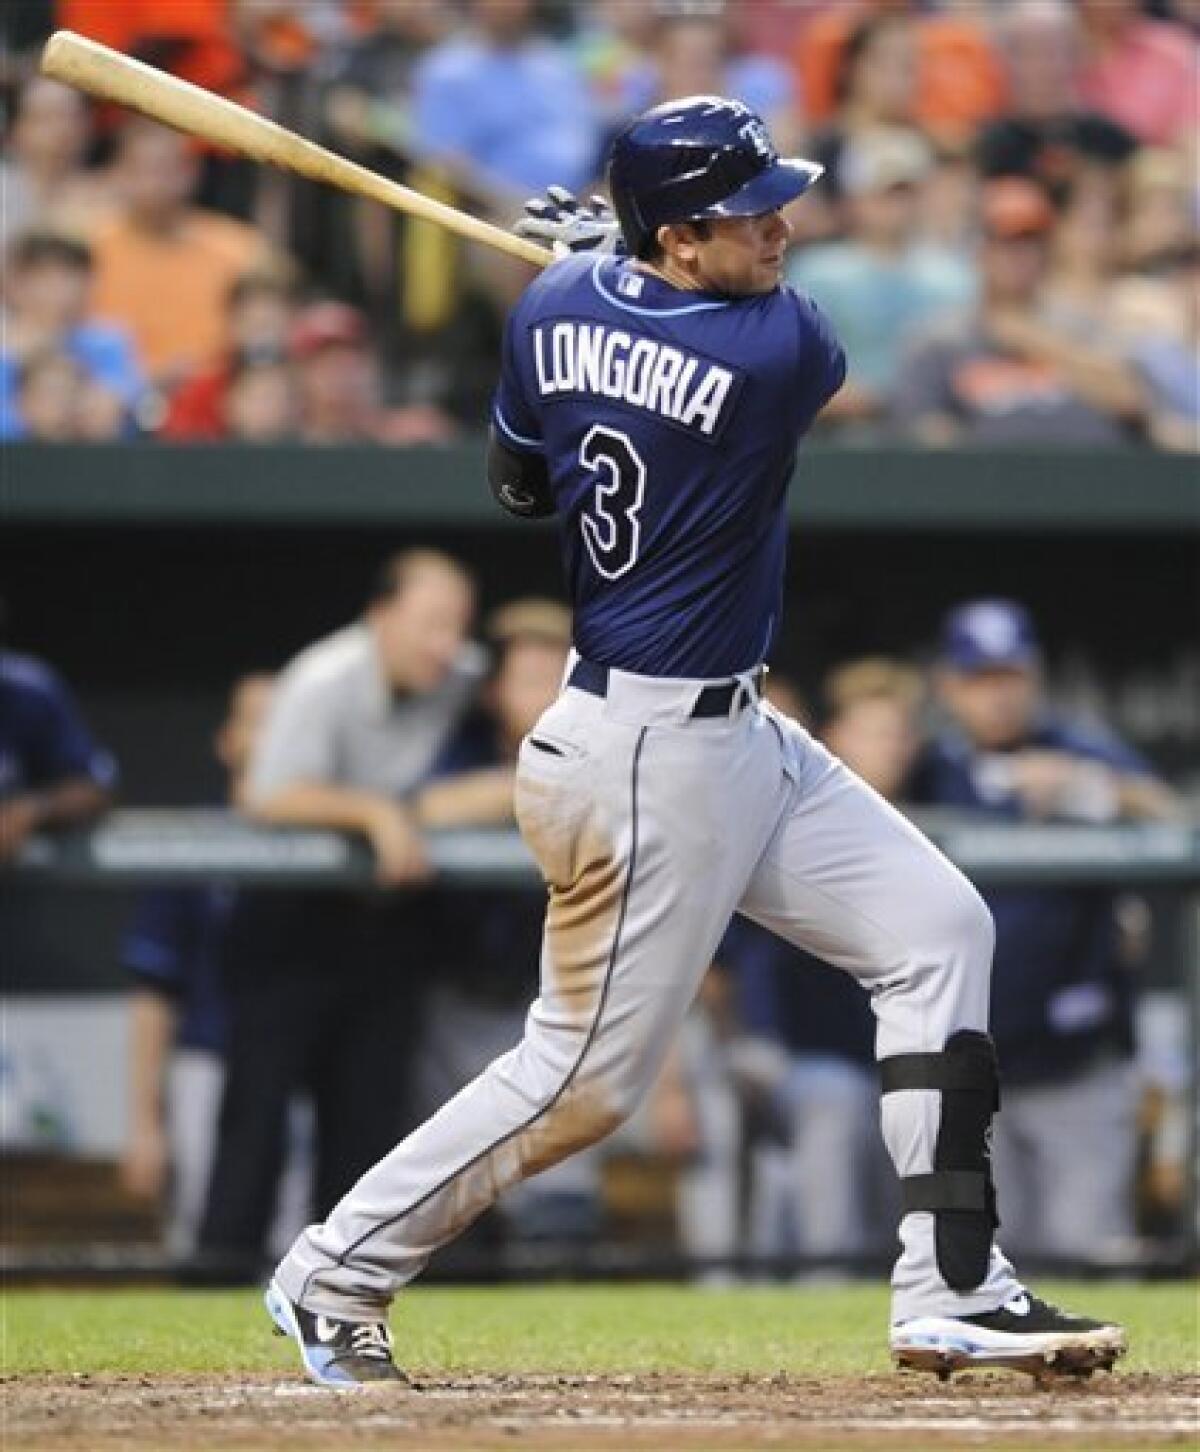 Zobrist leads Rays past Orioles 7-5 in 11 innings - The San Diego